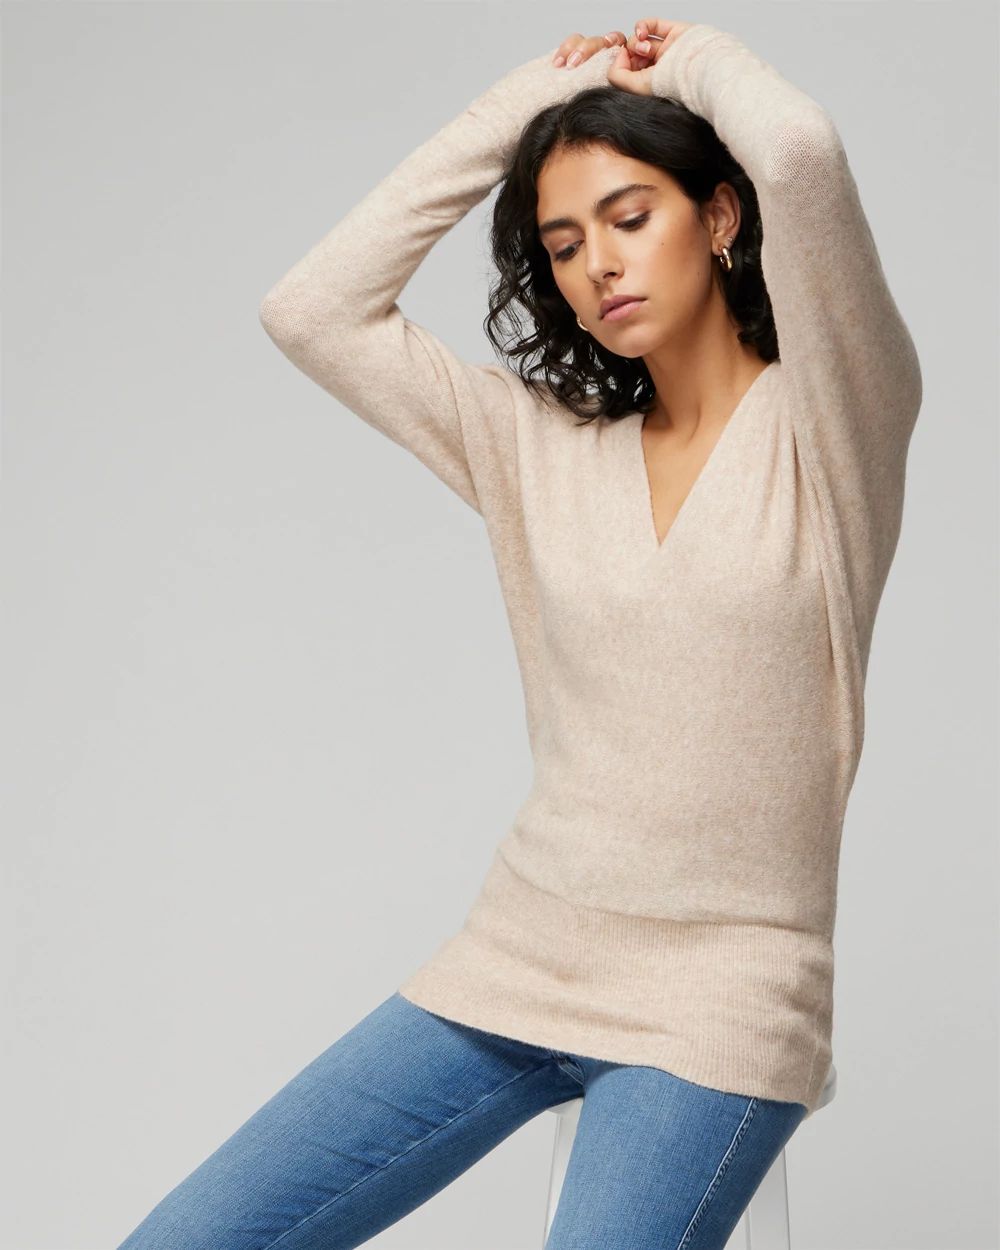 V-Neck Shirred Sleeve Tunic Pullover Sweater click to view larger image.